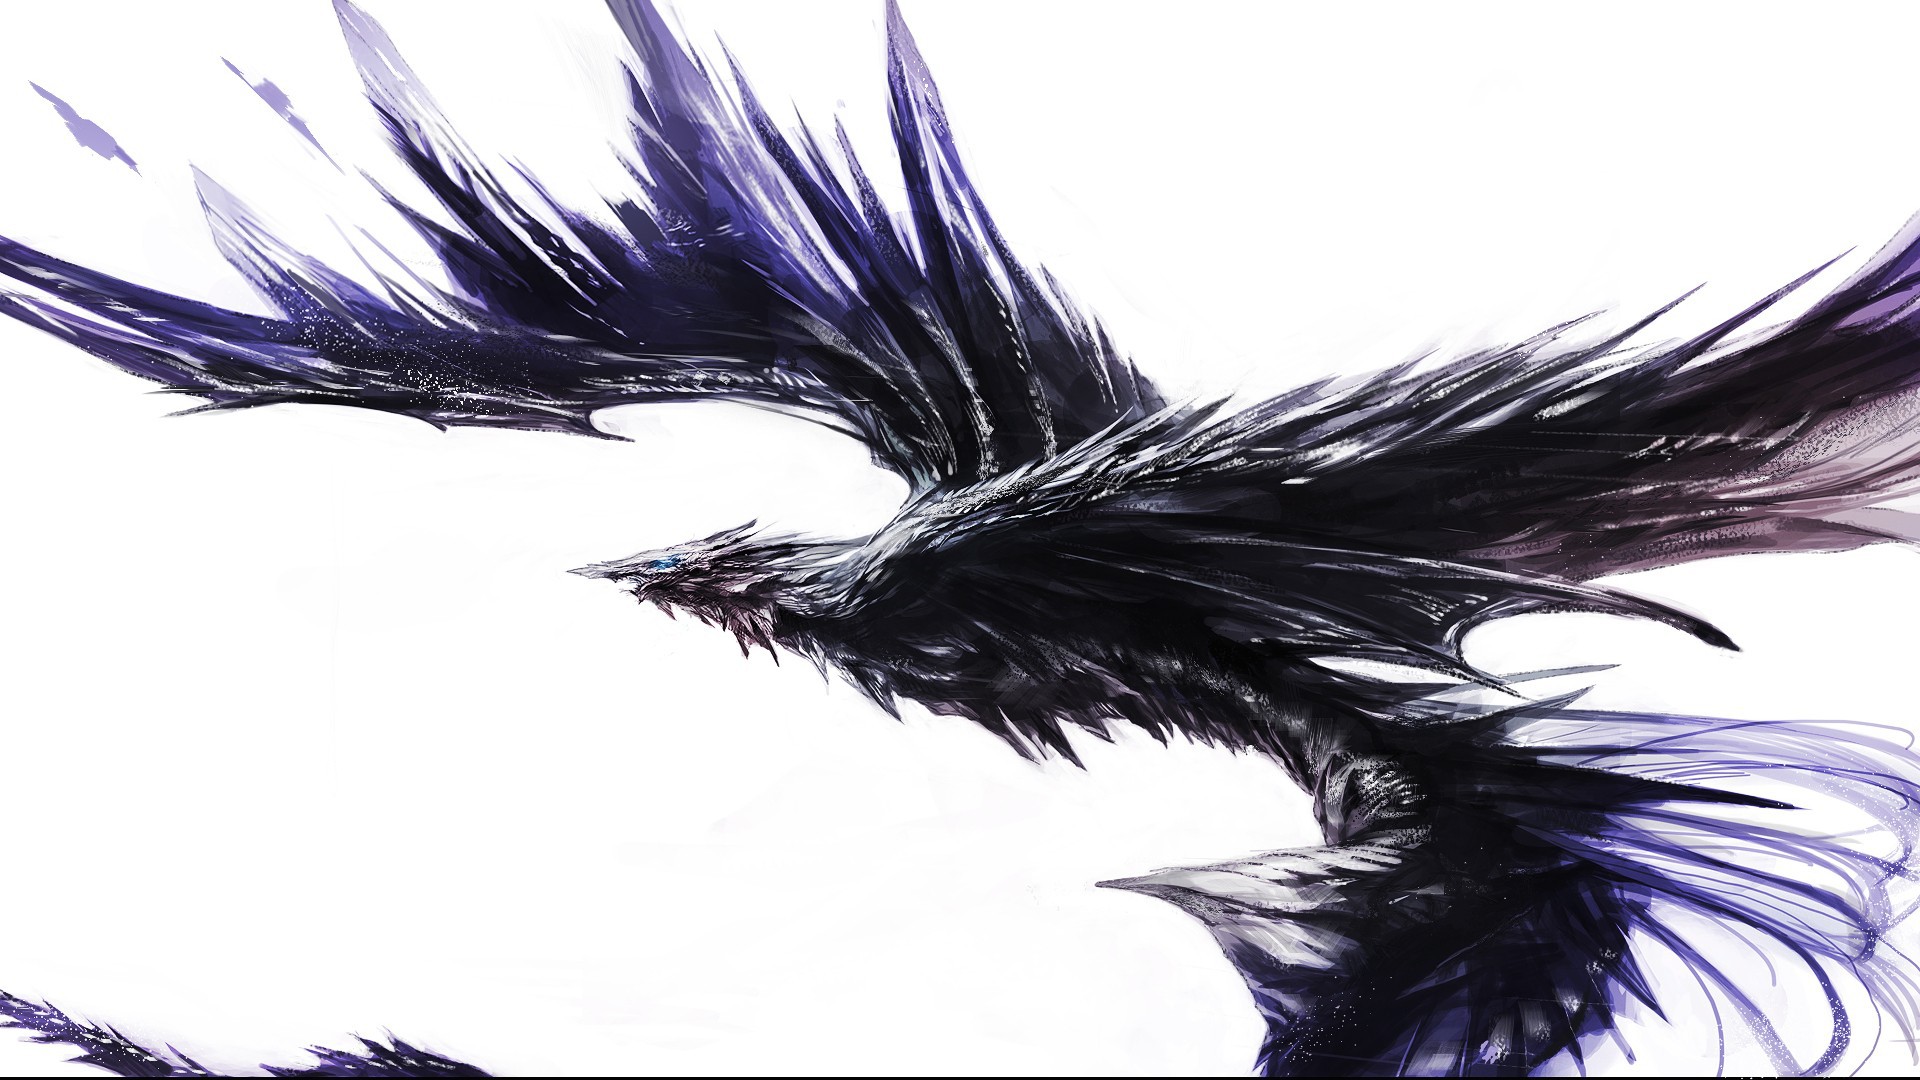 Black winged dragon wallpapers and images - wallpapers, pictures, photos